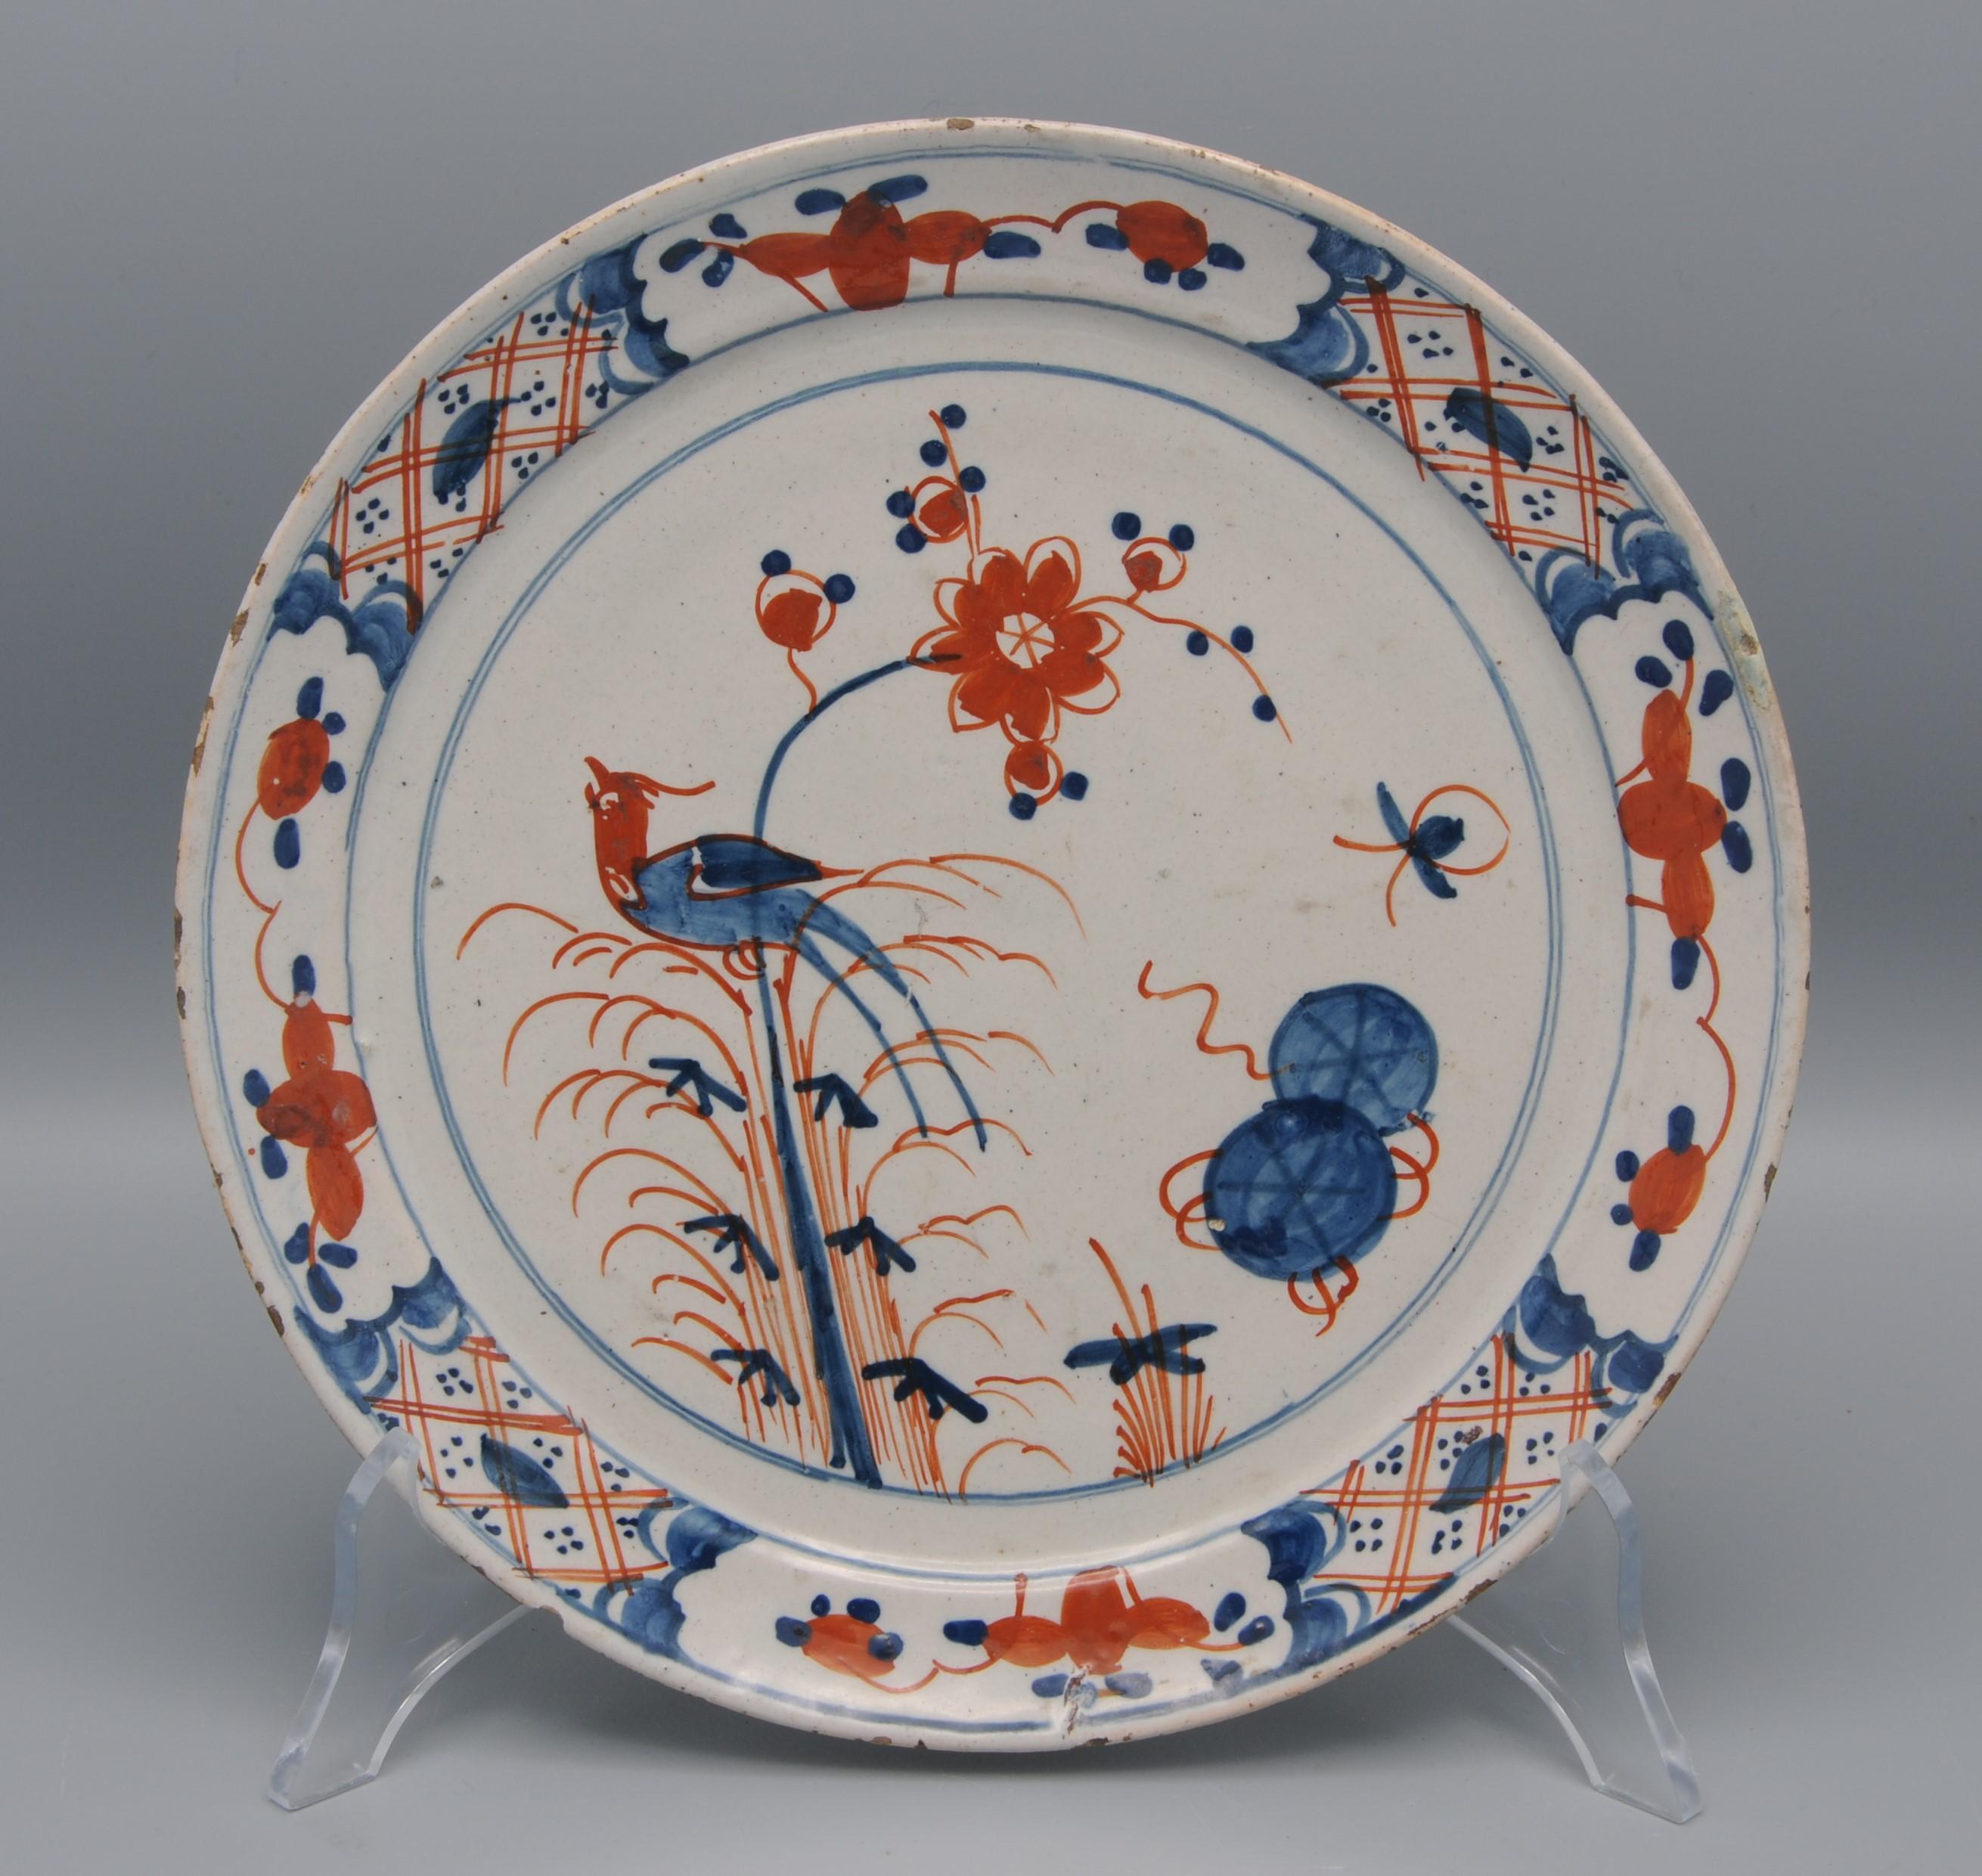 Dutch Delft  - 18th century Polychrome Chinoiserie Plate For Sale